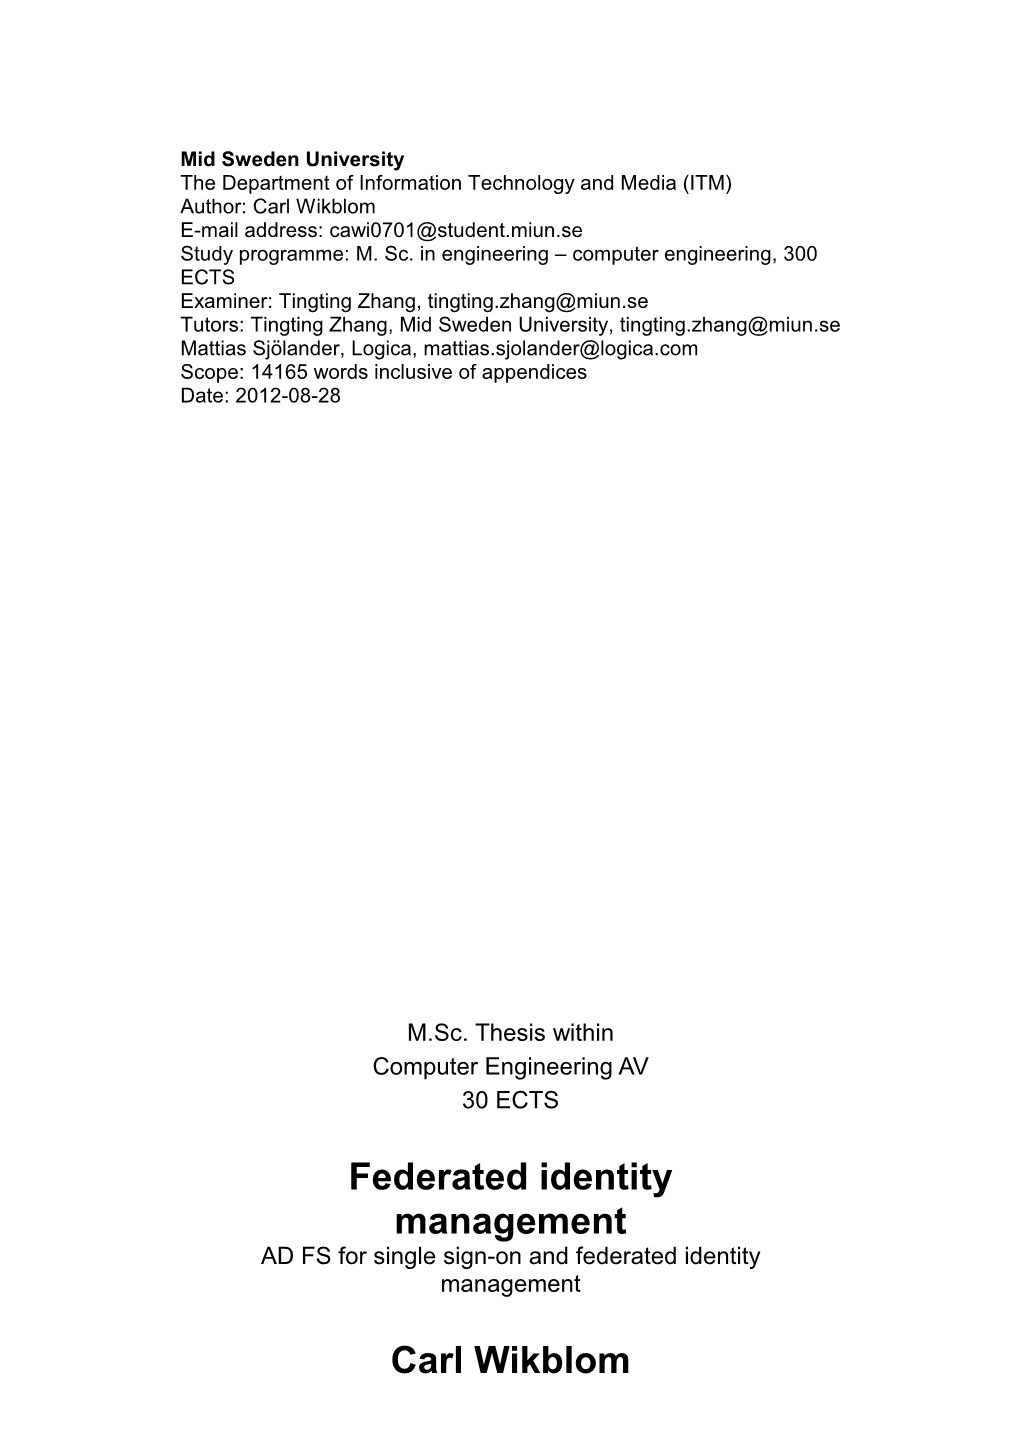 Federated Identity Management AD FS for Single Sign-On and Federated Identity Management